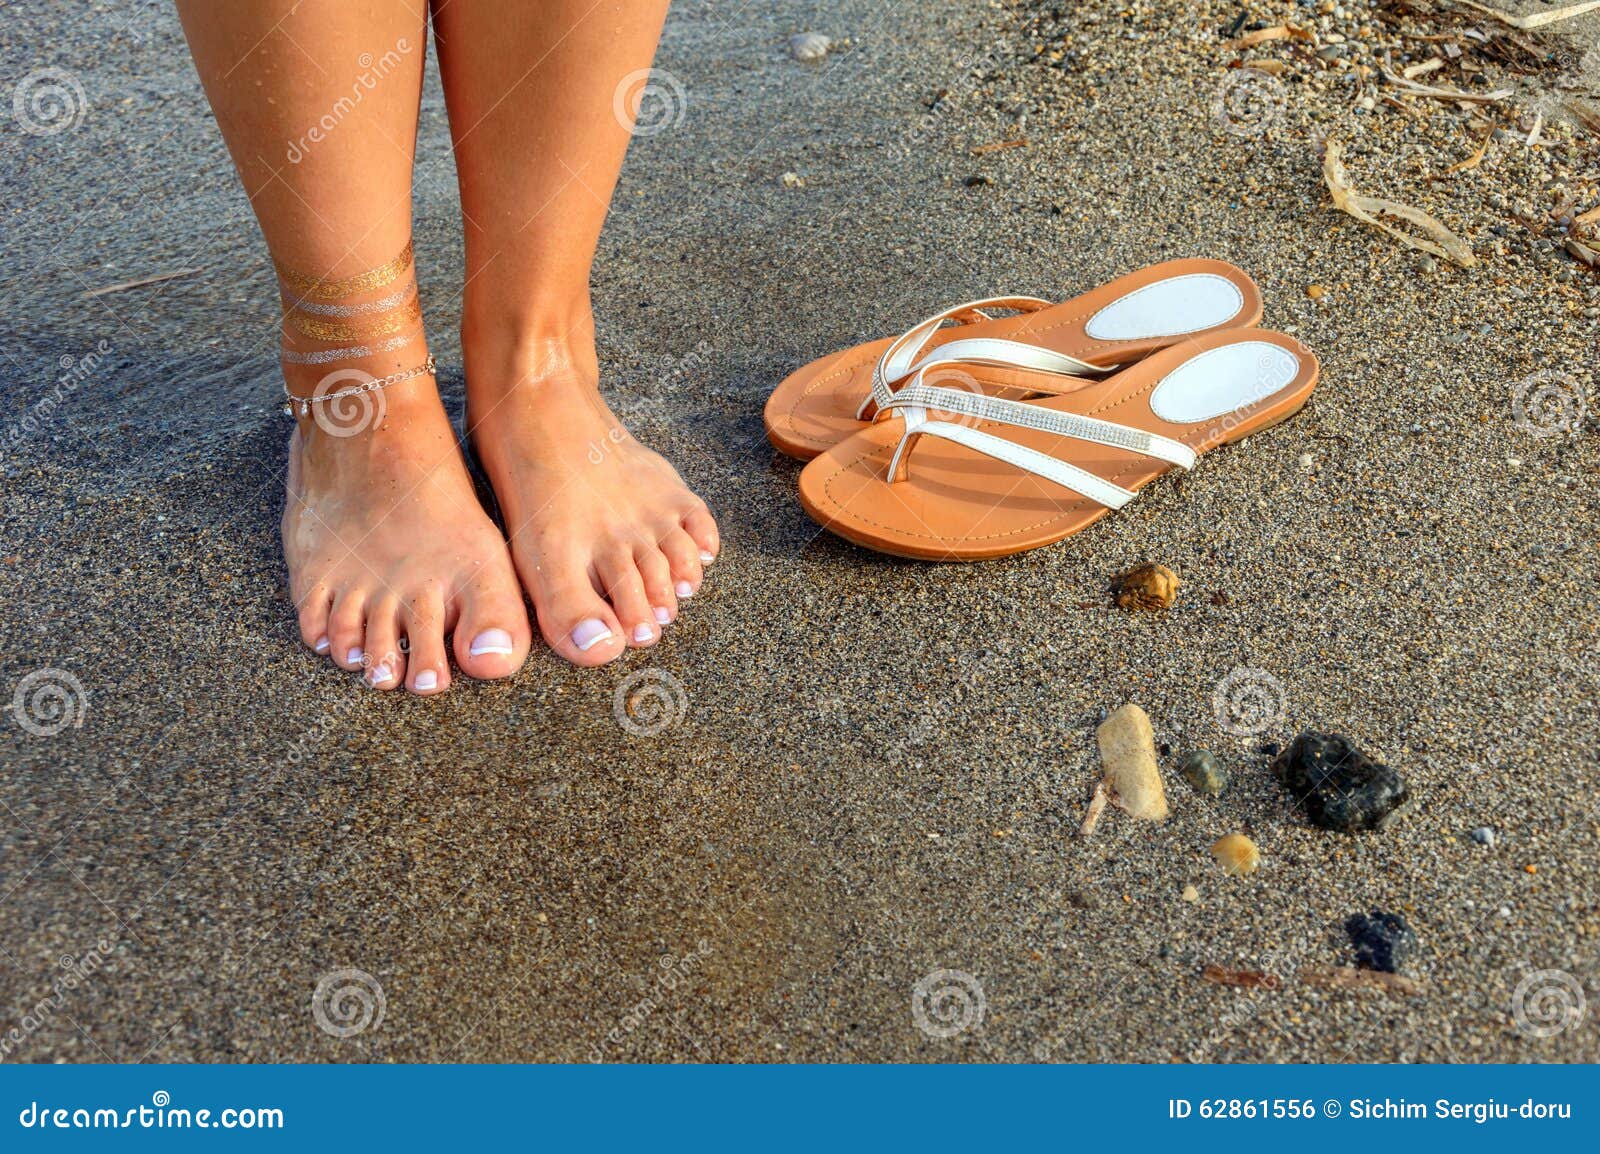 Feet And Flip Flops On The Beach Stock Photo - Image: 62861556